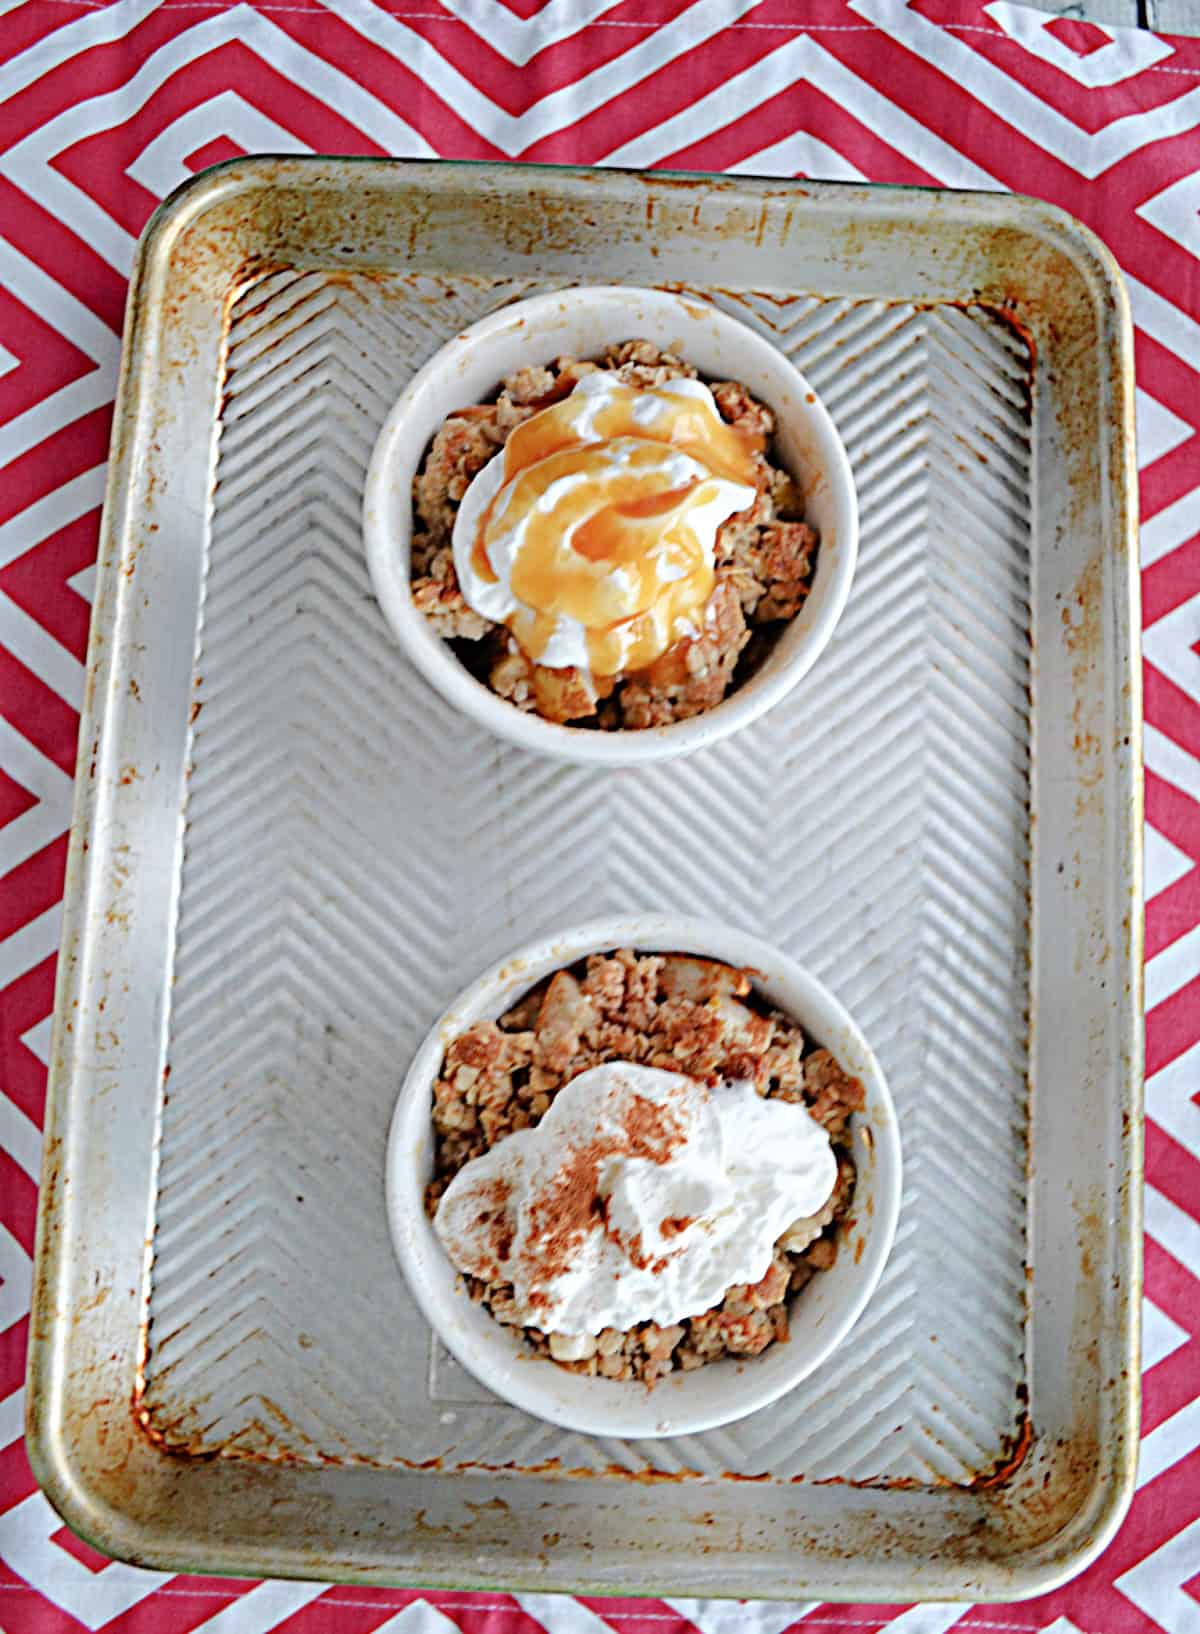 Two dishes of Apple Pear Crisp with whipped cream and caramel on top.